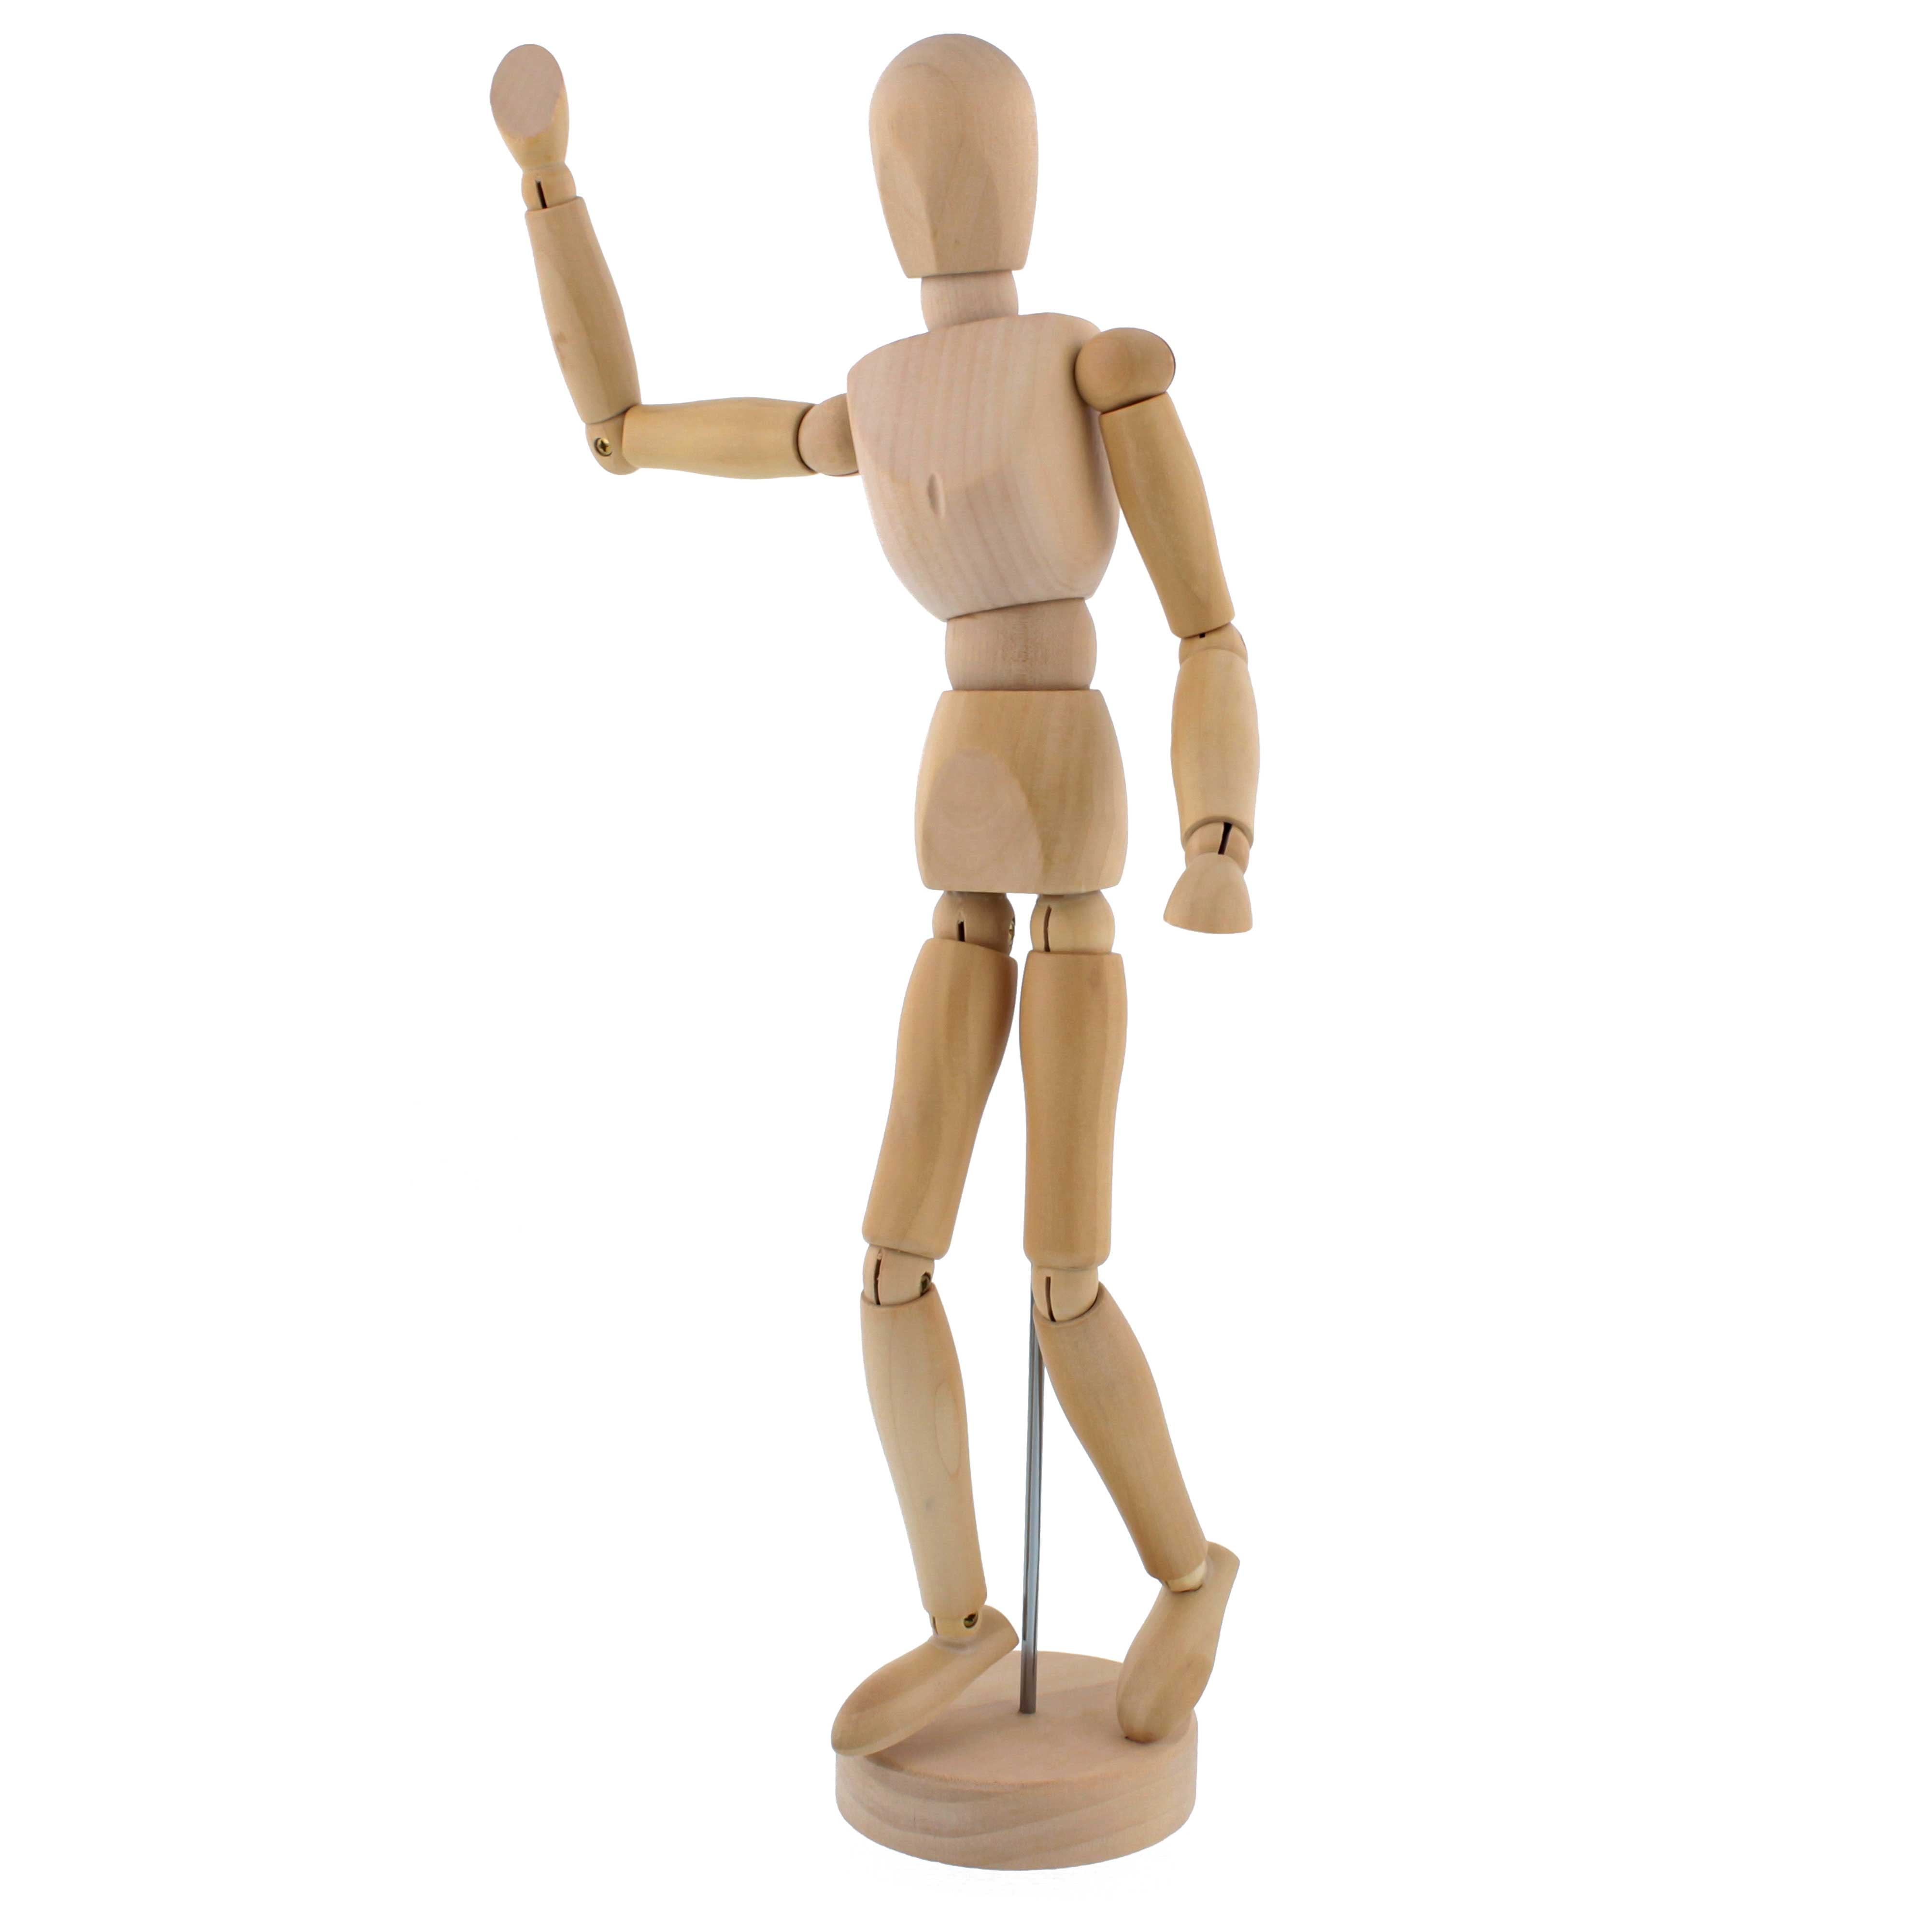 Bright Creations Posable Hand Model for Art 7 Inches, 2 Pack Left and Right Mannequin 